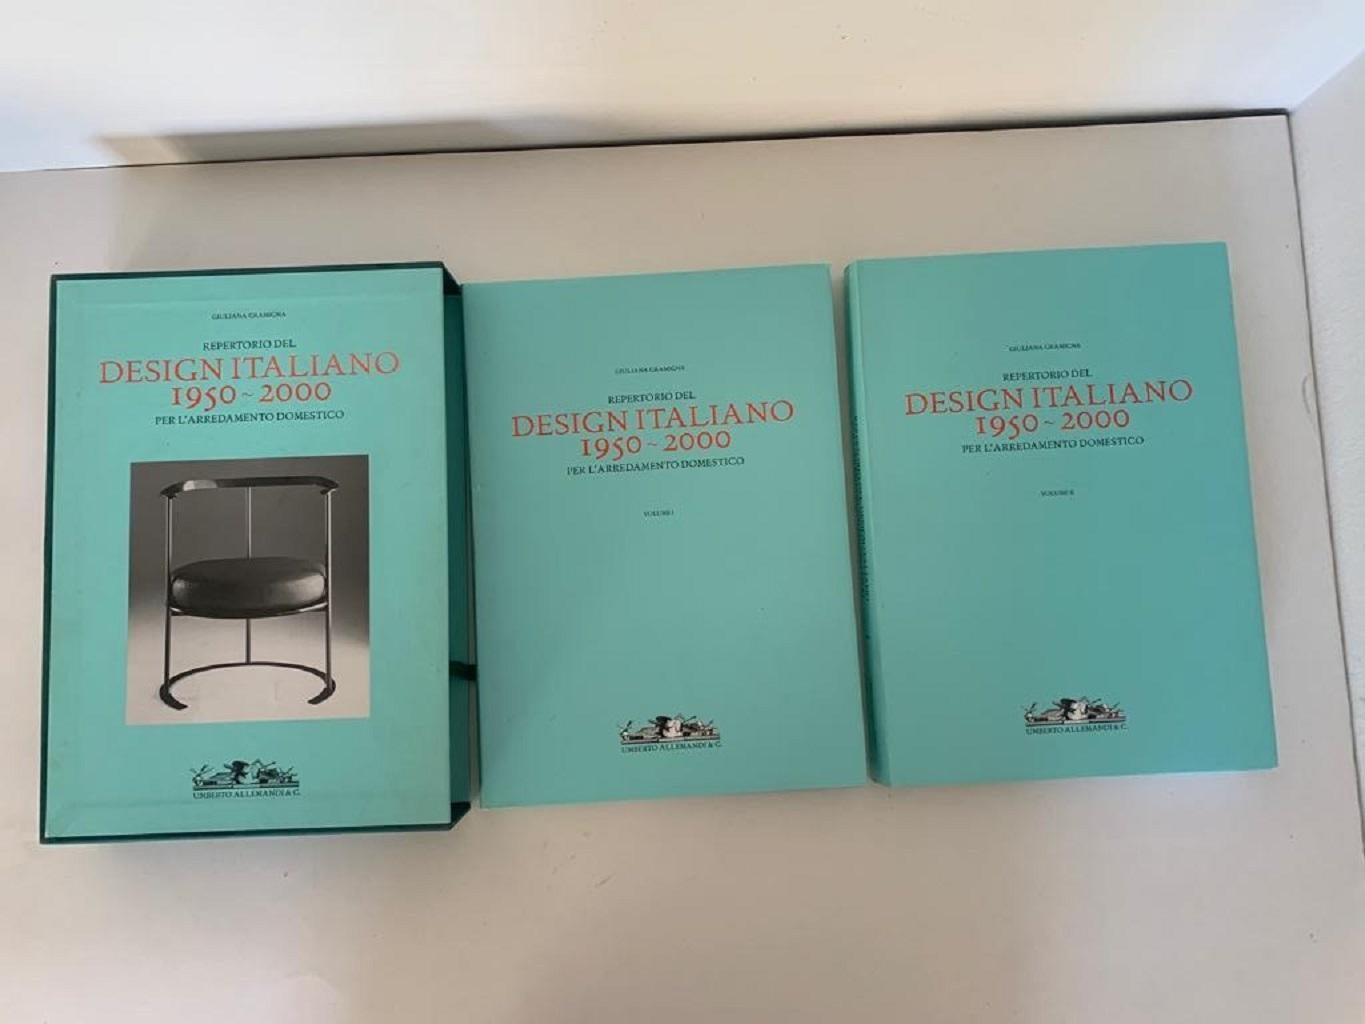 The most comprehensive resource on mid to late 20th-century Italian design. Covering 50 years of furniture designs, this two-volume boxed set is organised by year and broken into sections on seating, furniture and lighting. Designs are clearly